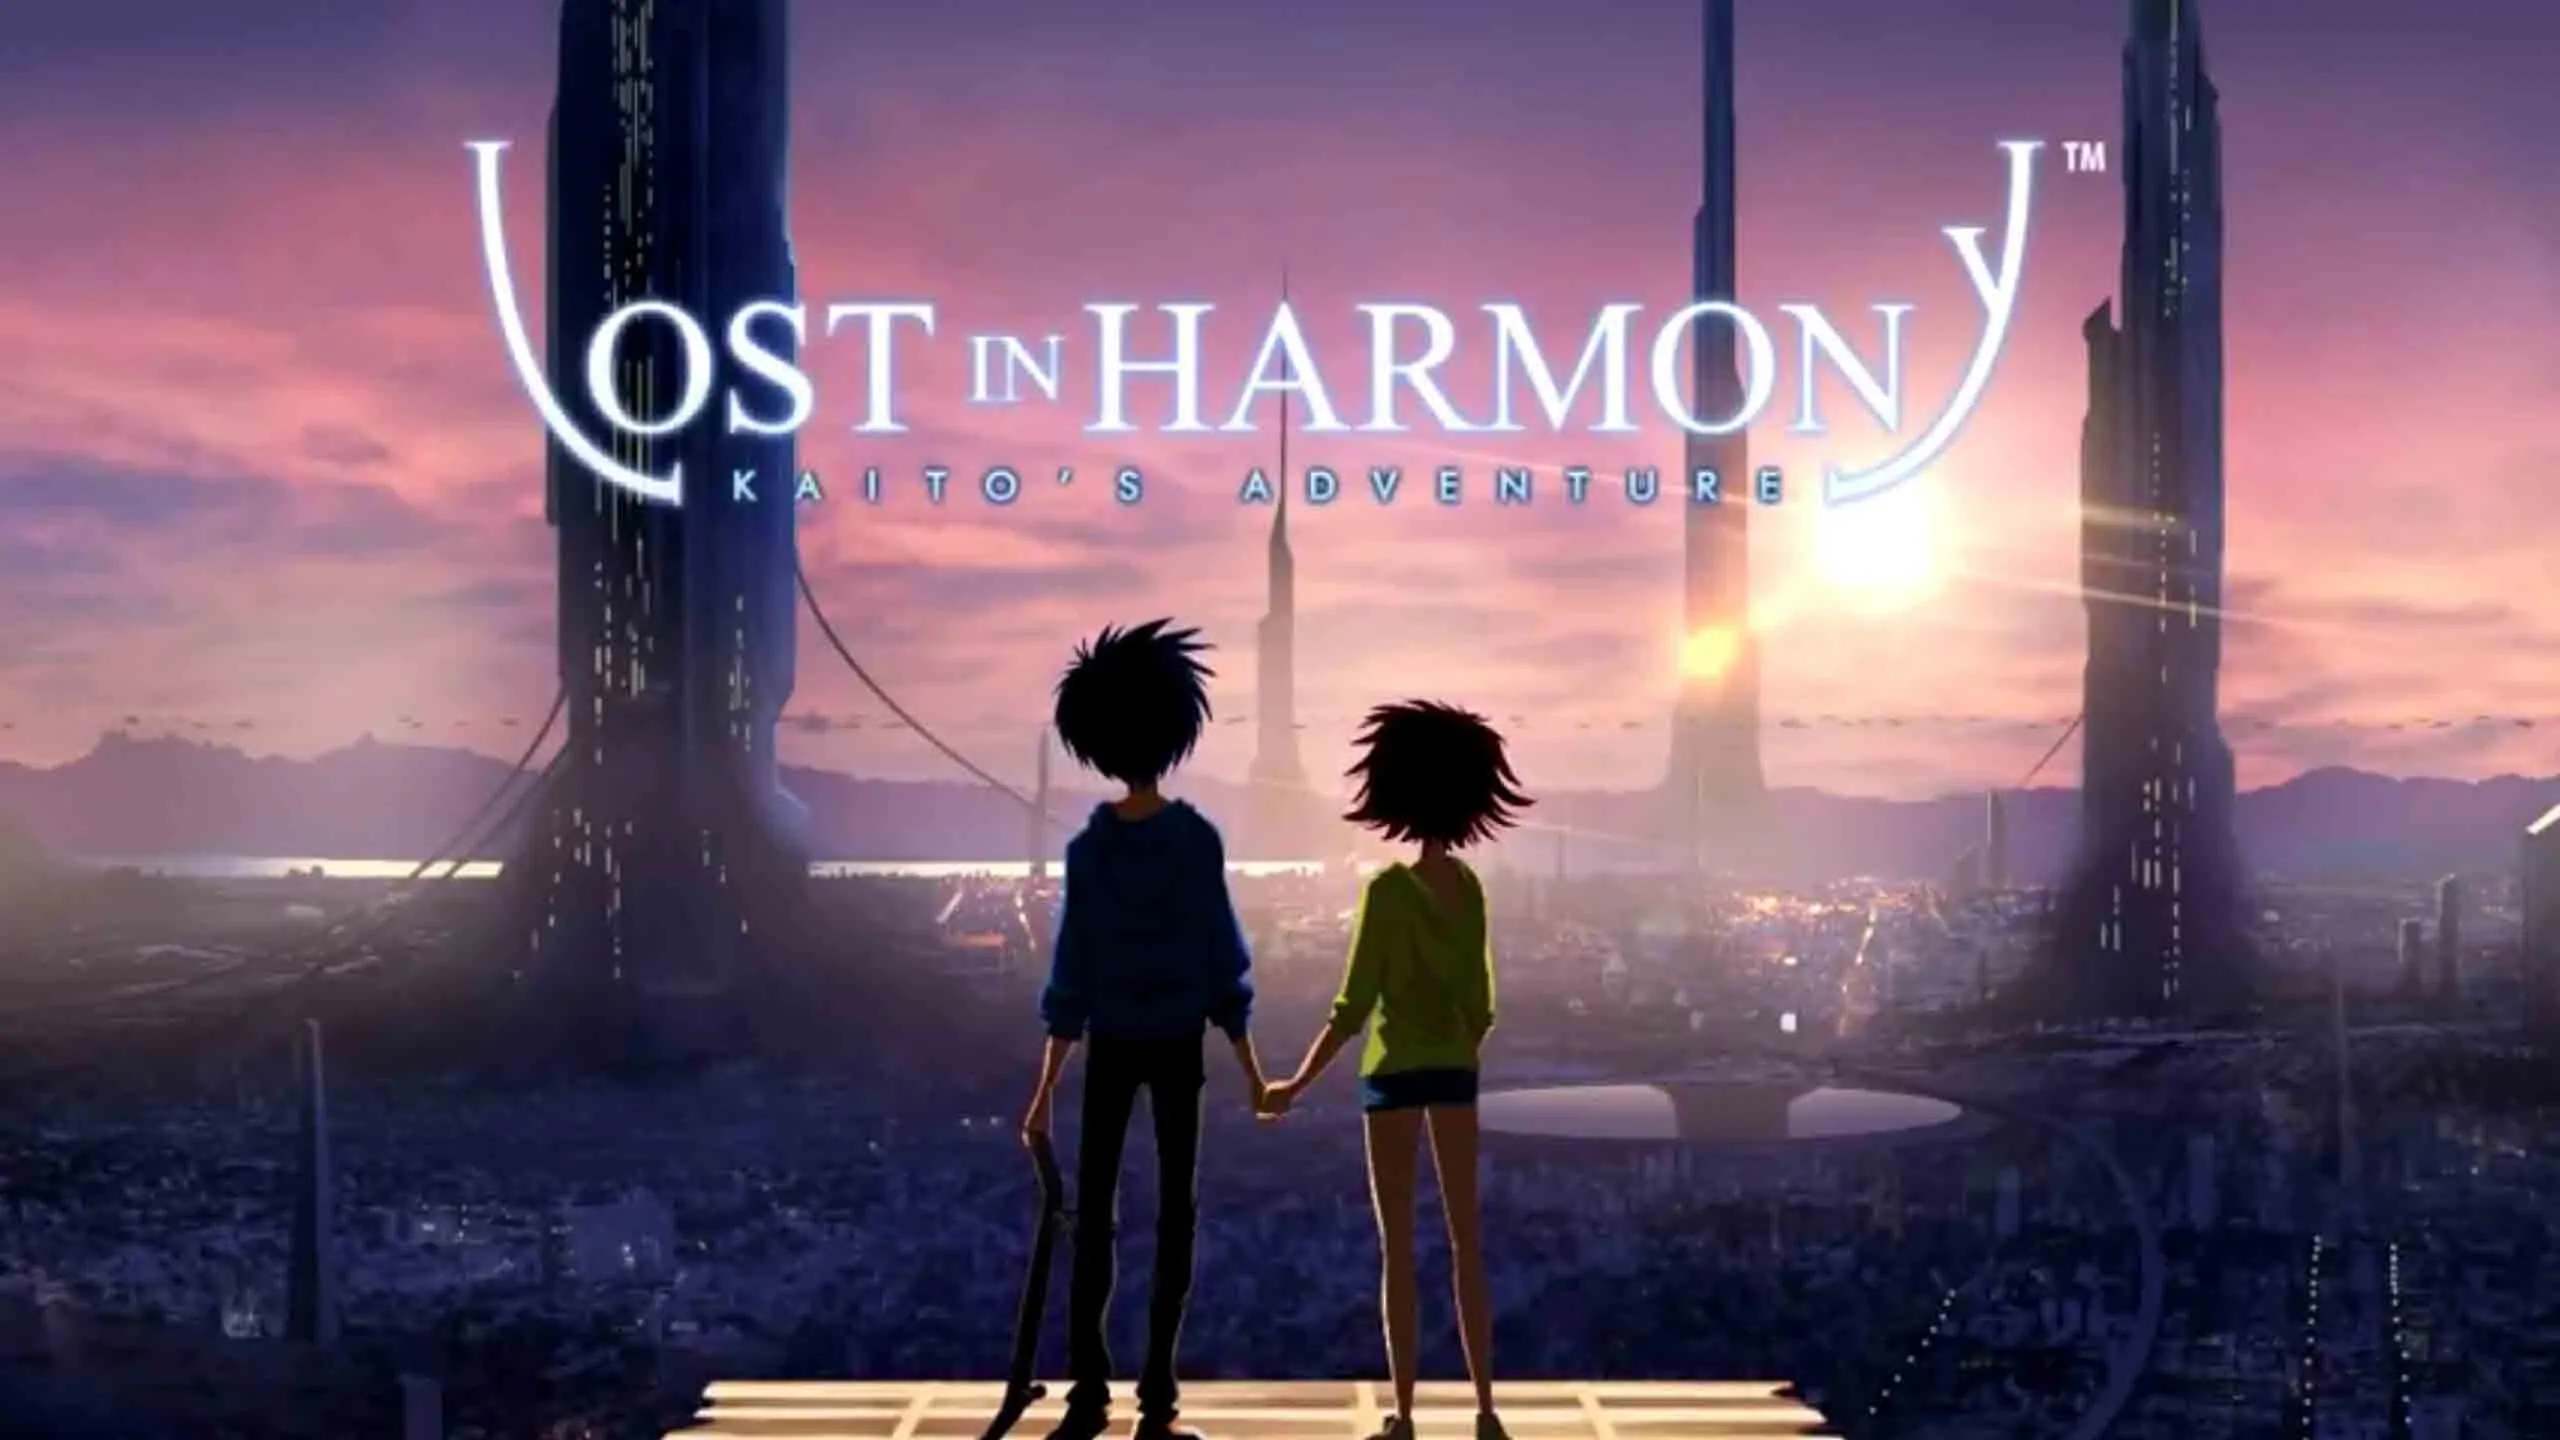 lost in harmony Apk Download DroidApk.org (1)